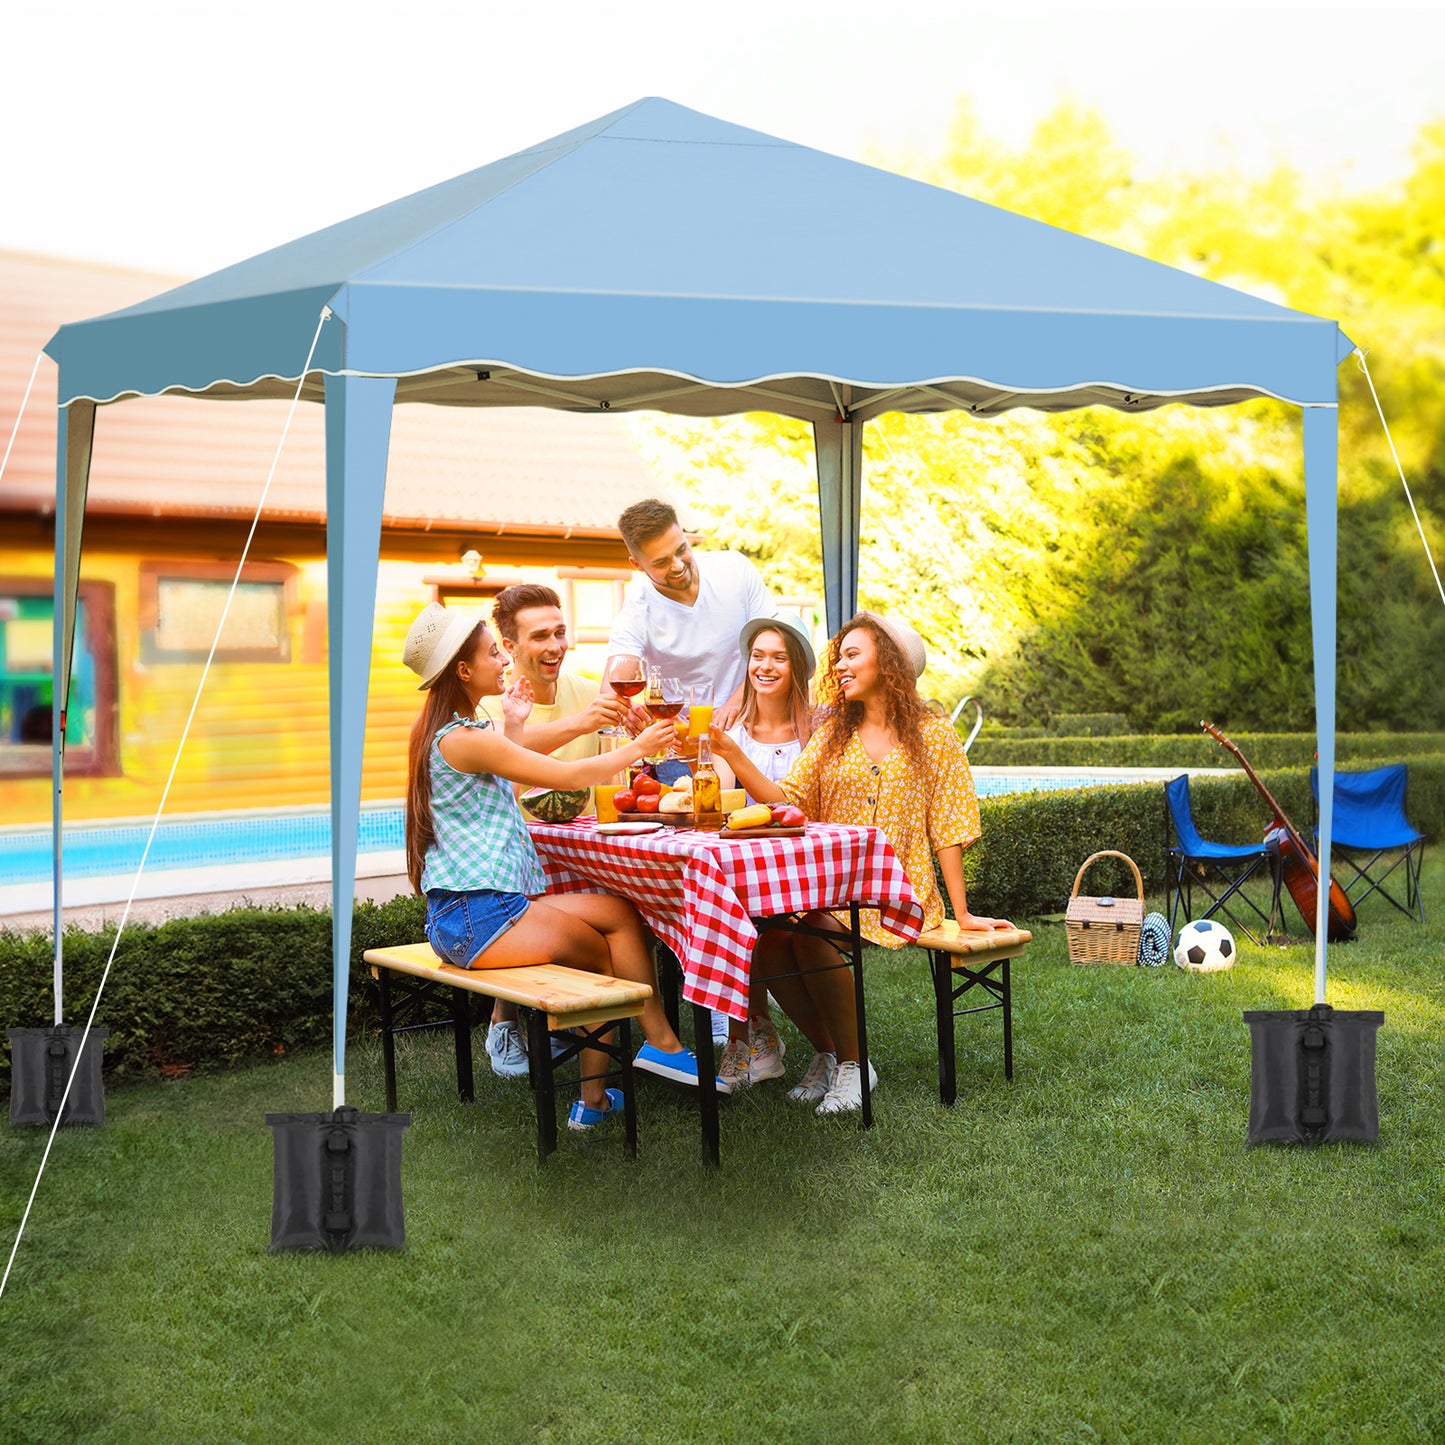 Arlopu 10x10FT Pop Up Canopy Tent with 4 Sidewalls, Commercial -Series Instant Canopy Tent, Outdoor Portable Gazebo with Wheeled Bag, Party Canopies Event Tent for Wedding/Patio/Camping